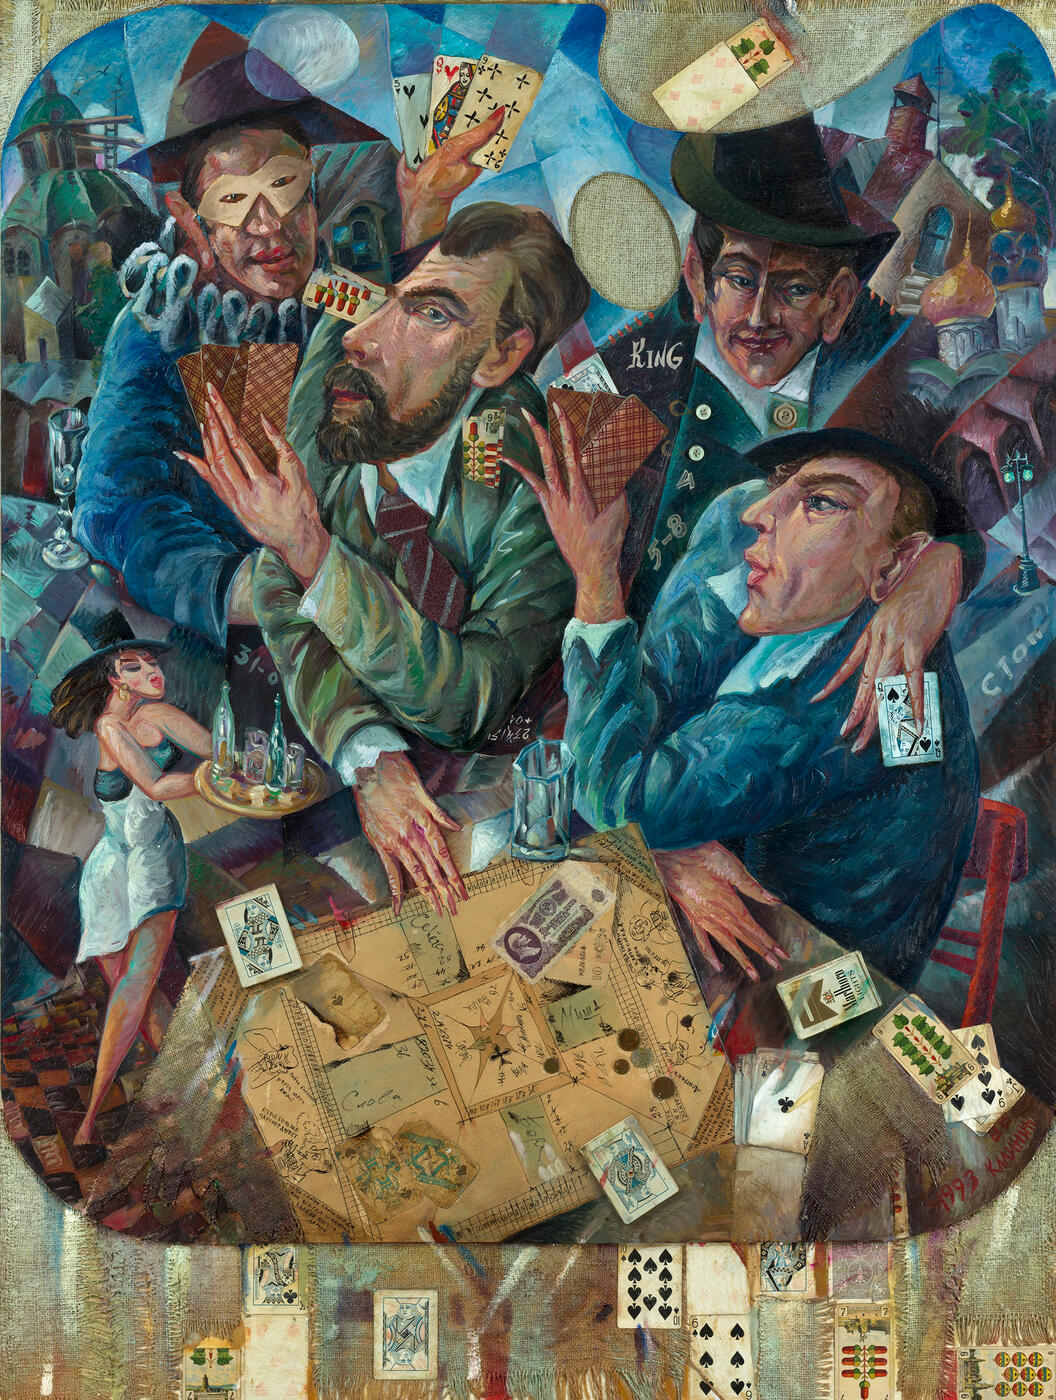 Card Players, from the Series "My Palette", Accompanied by the Artist’s Palette with Brushes and the Card Game Sheet